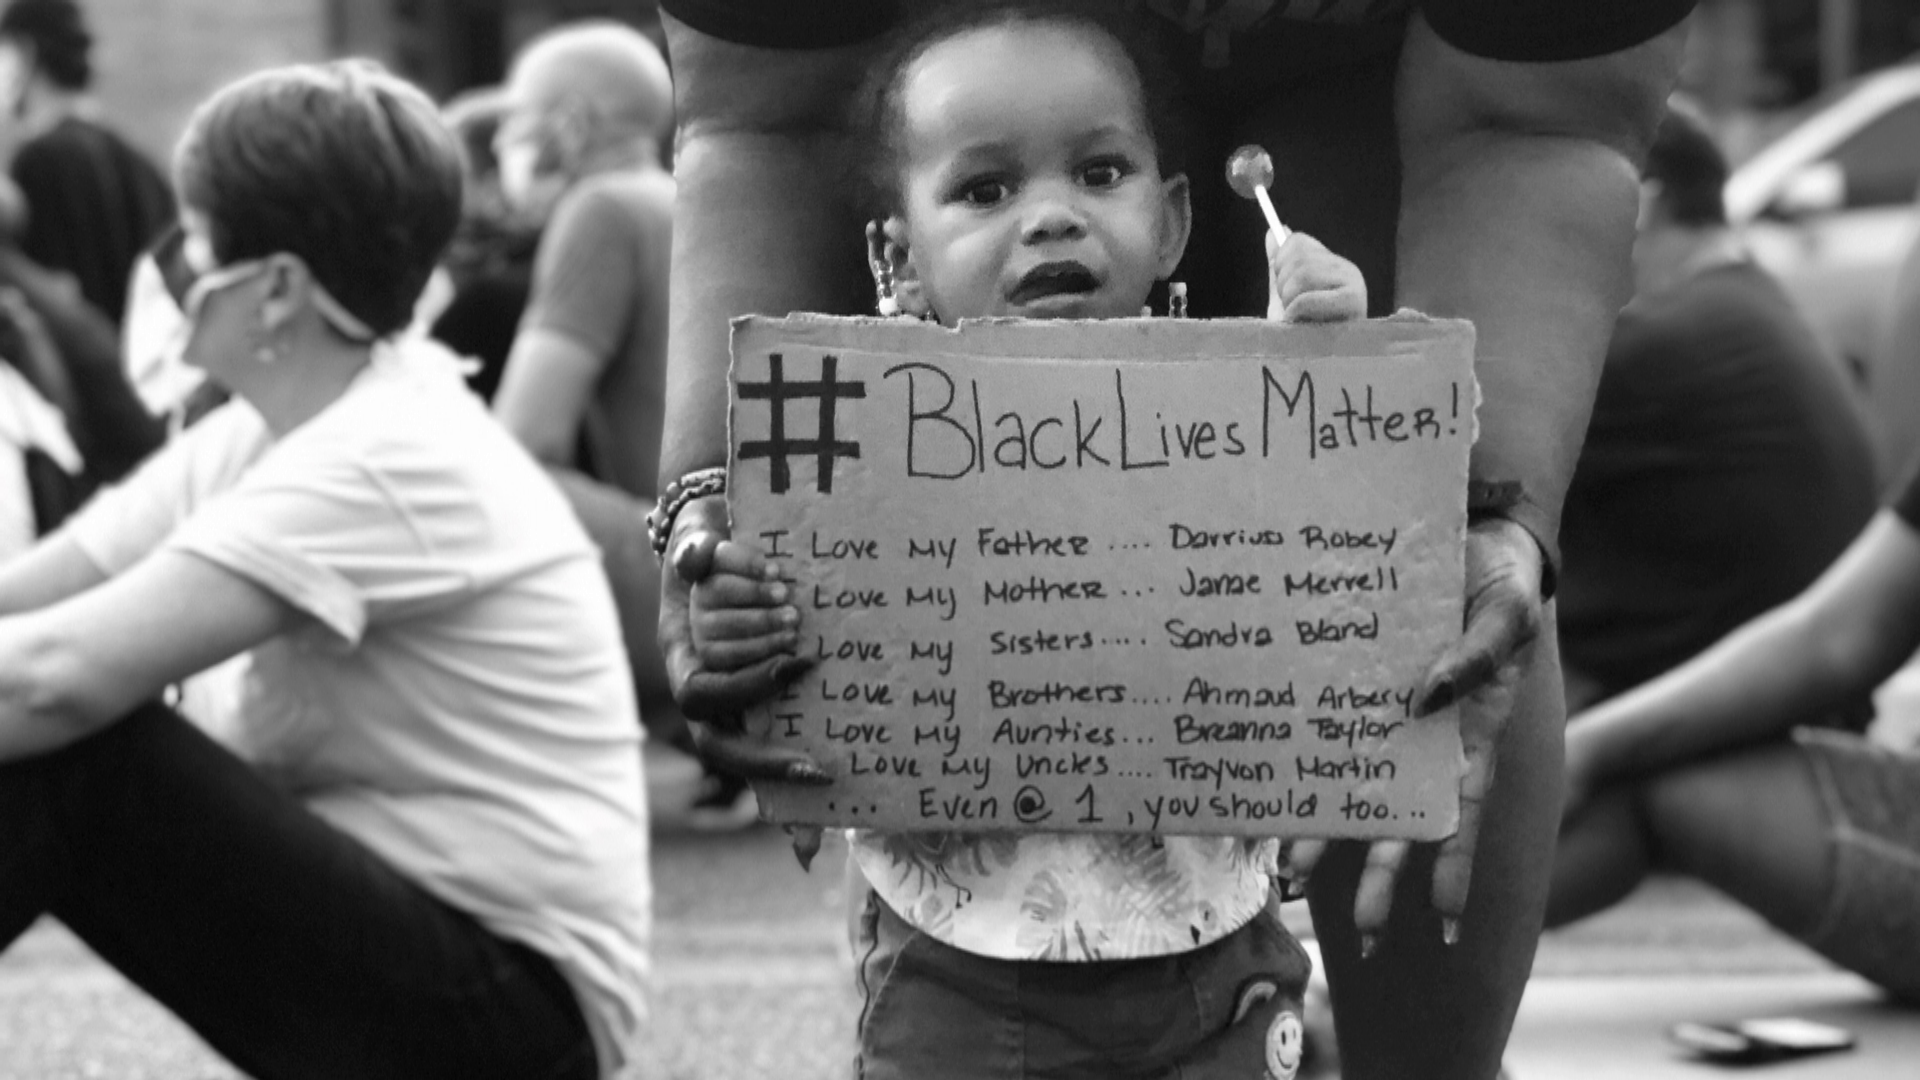 Thousands across the nation have come together to protest police brutality and racial injustice. Take a look back at some of the images from this past week.